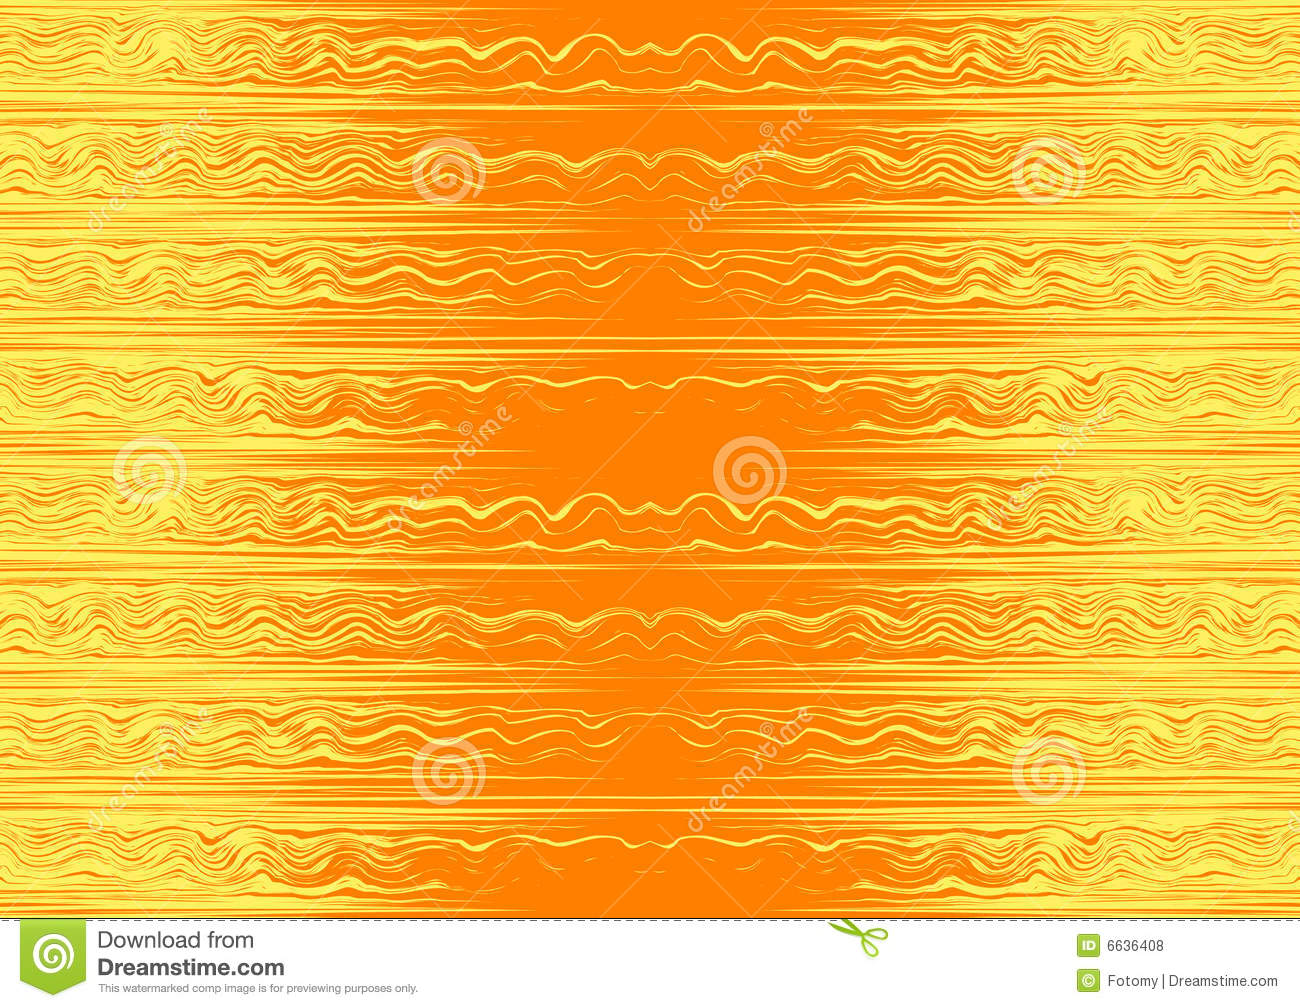 Colorful Horizontal Lines Royalty Free Stock Photos   Image  6636408